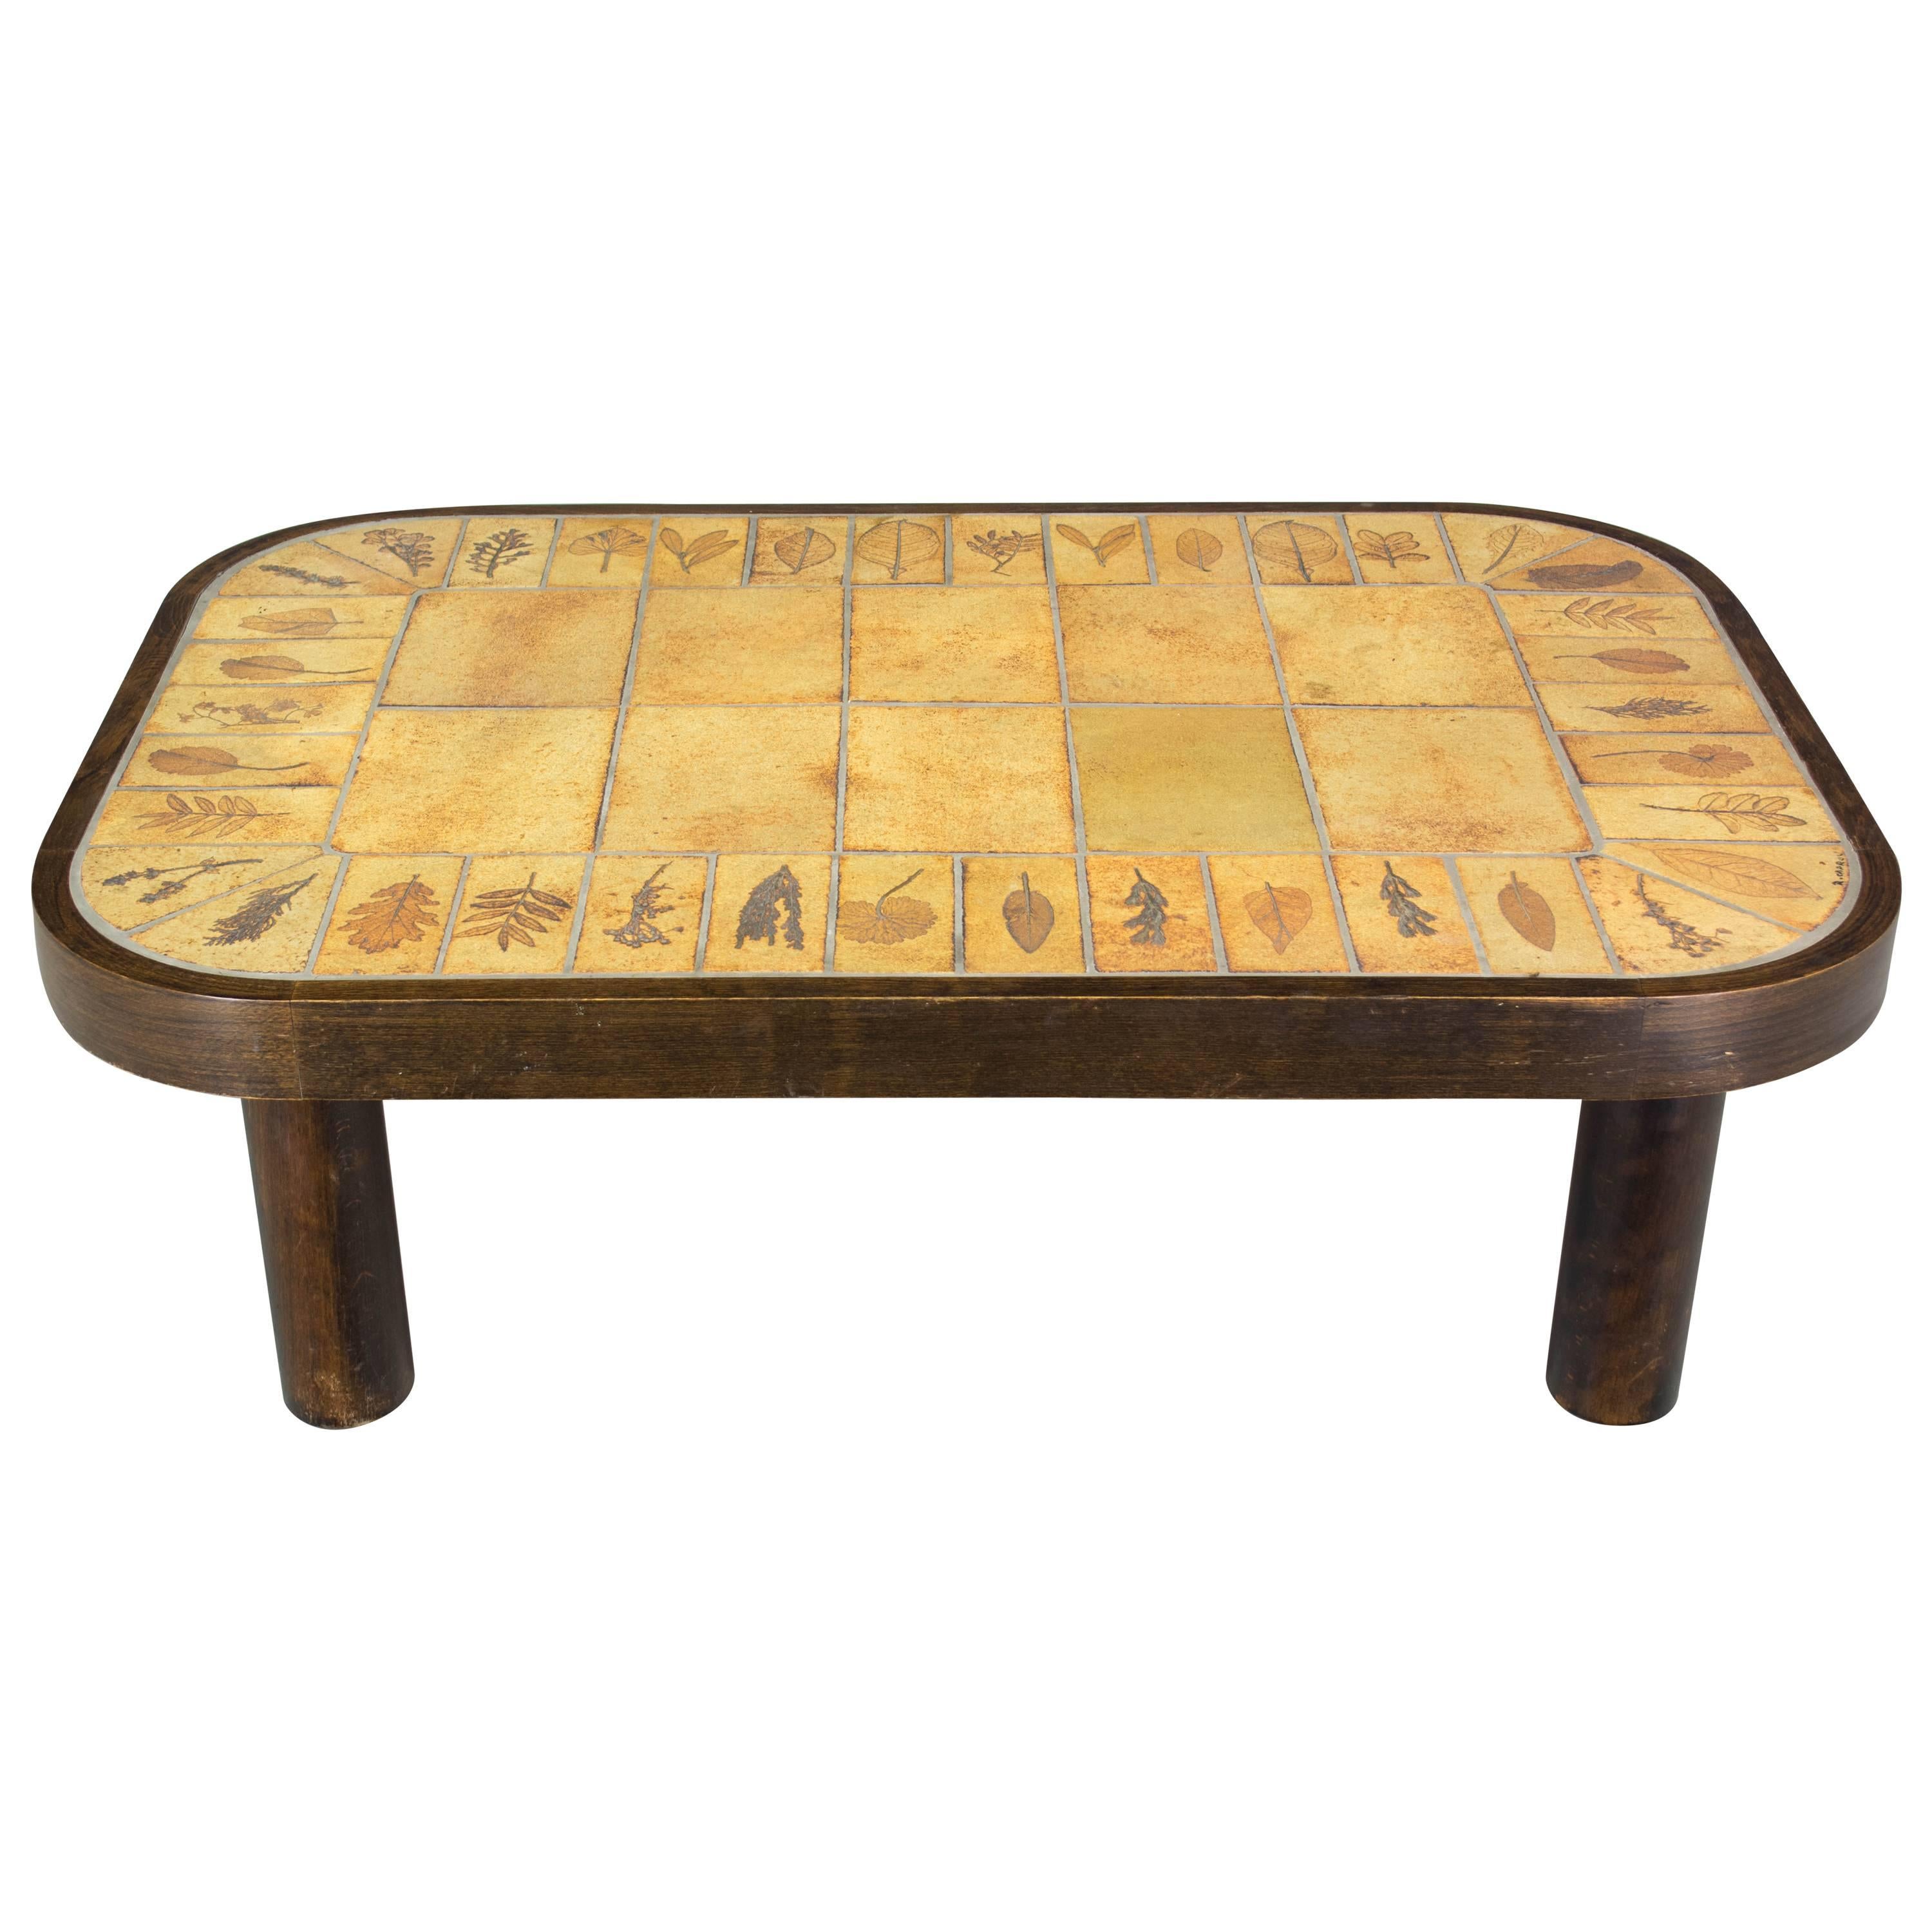 Roger Capron Ceramic Tile Top Coffee Table